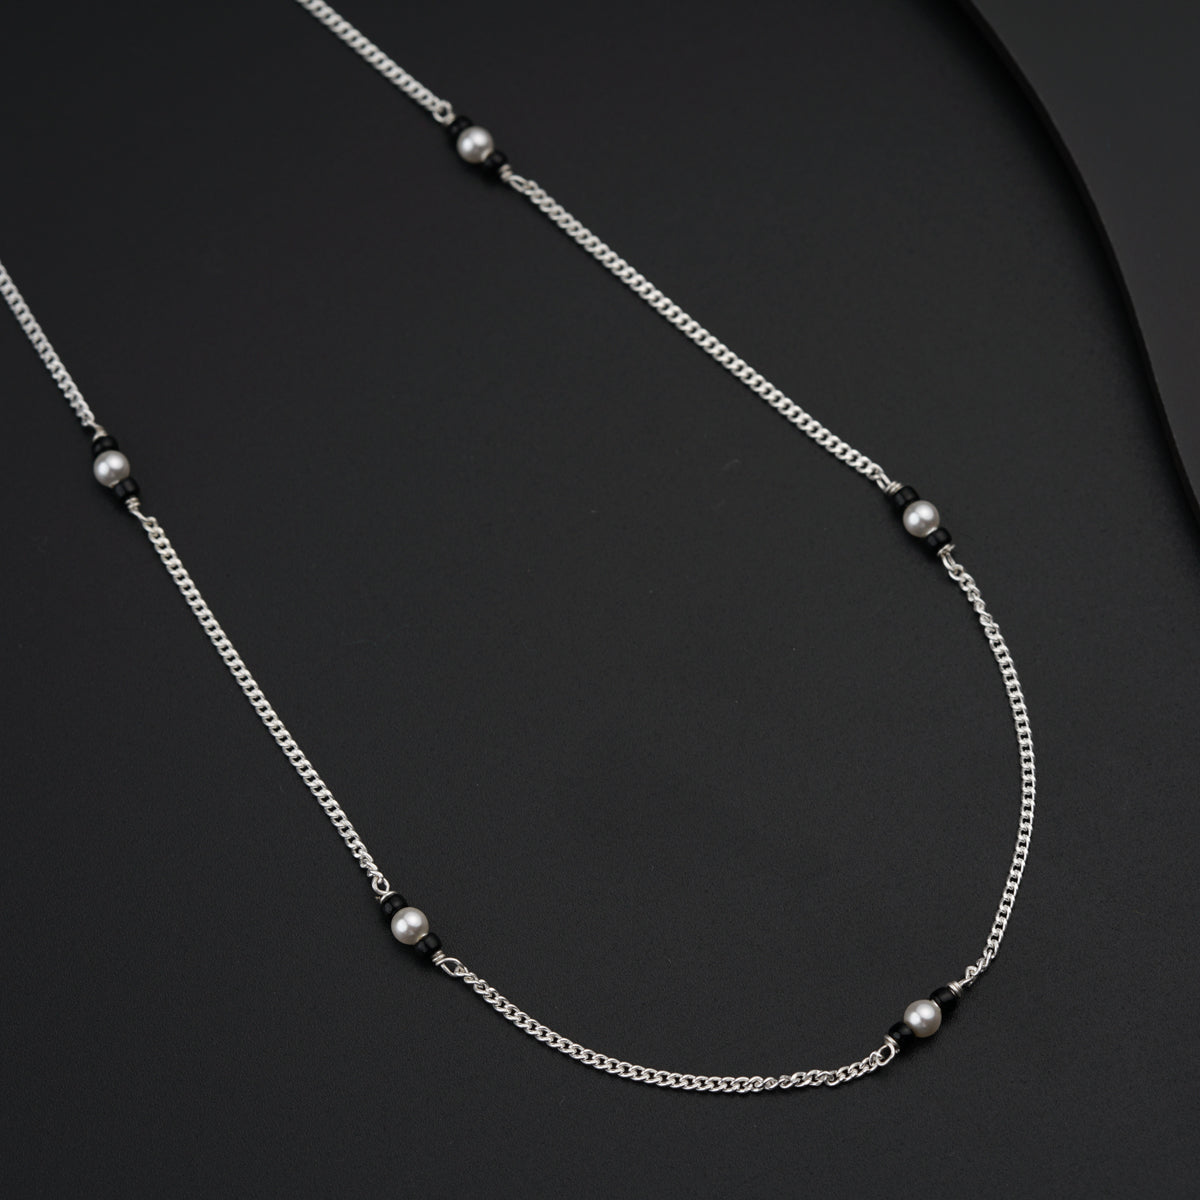 a silver necklace with pearls on a black surface